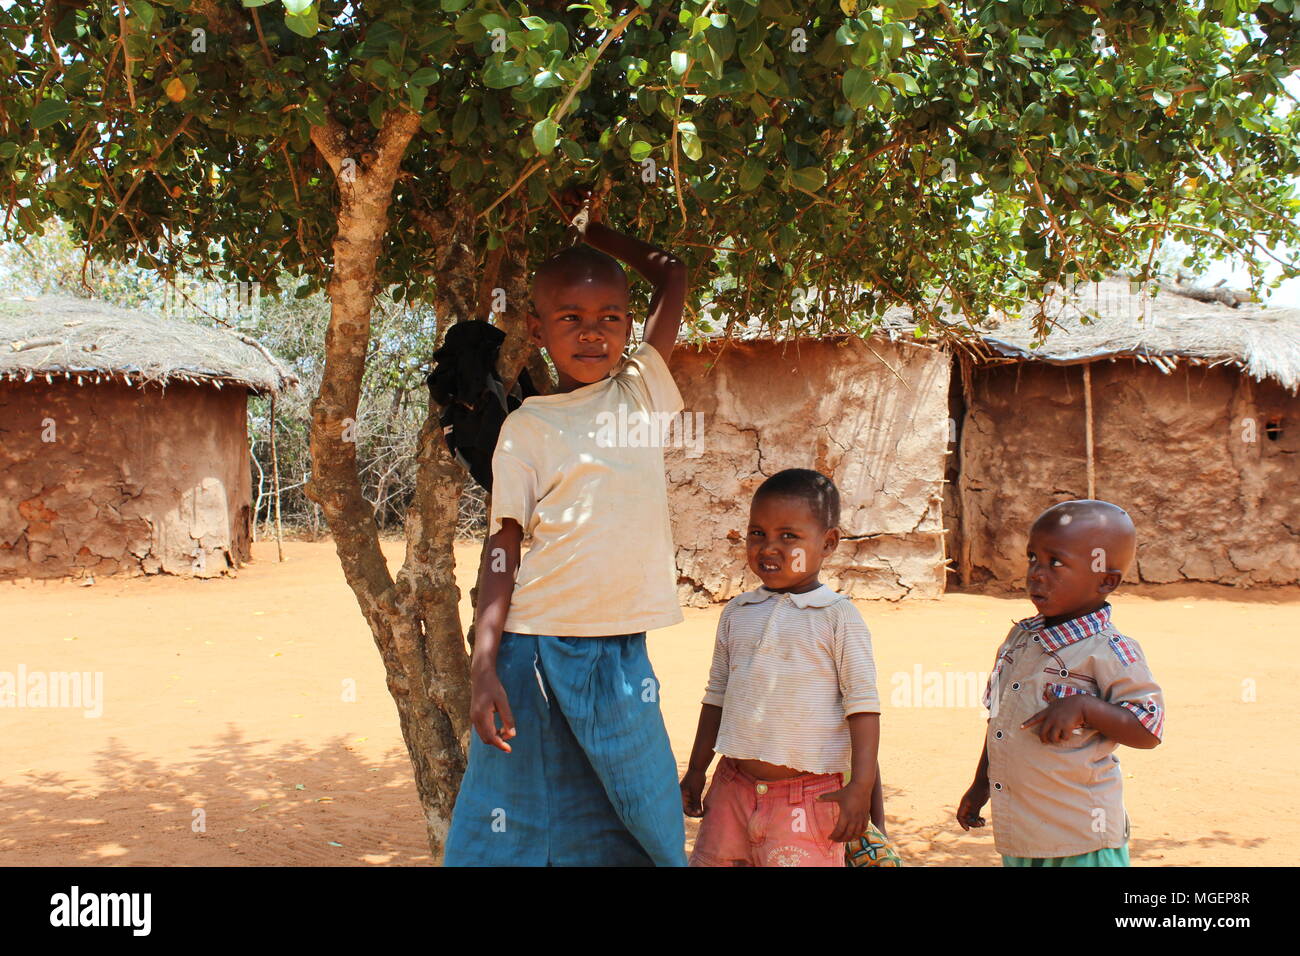 Smiling African children portrayed under a tree in a small African village Stock Photo